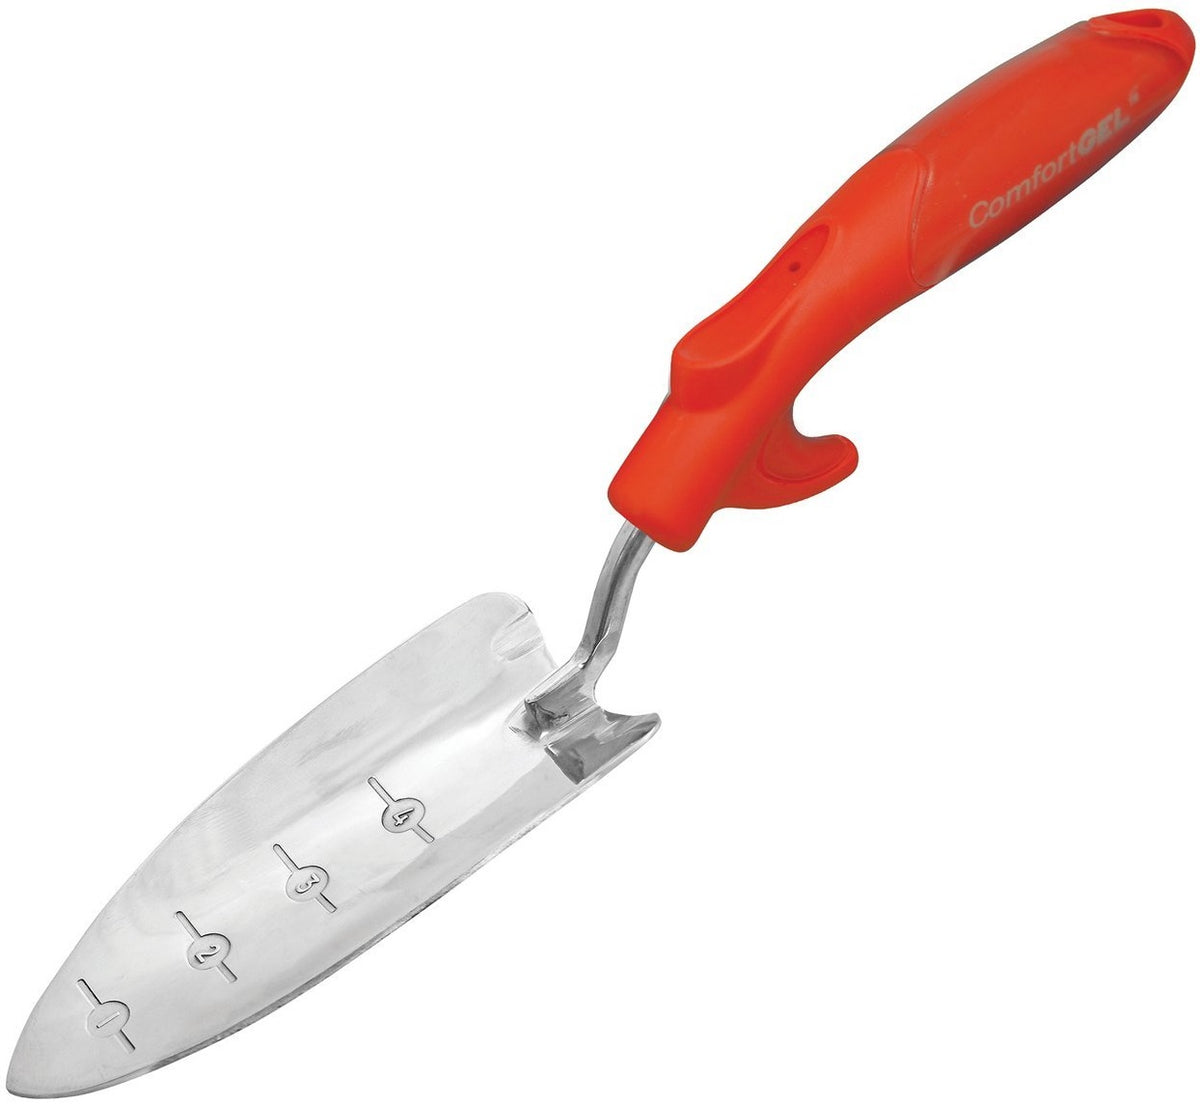 buy trowels & garden hand tools at cheap rate in bulk. wholesale & retail lawn & garden hand tools store.